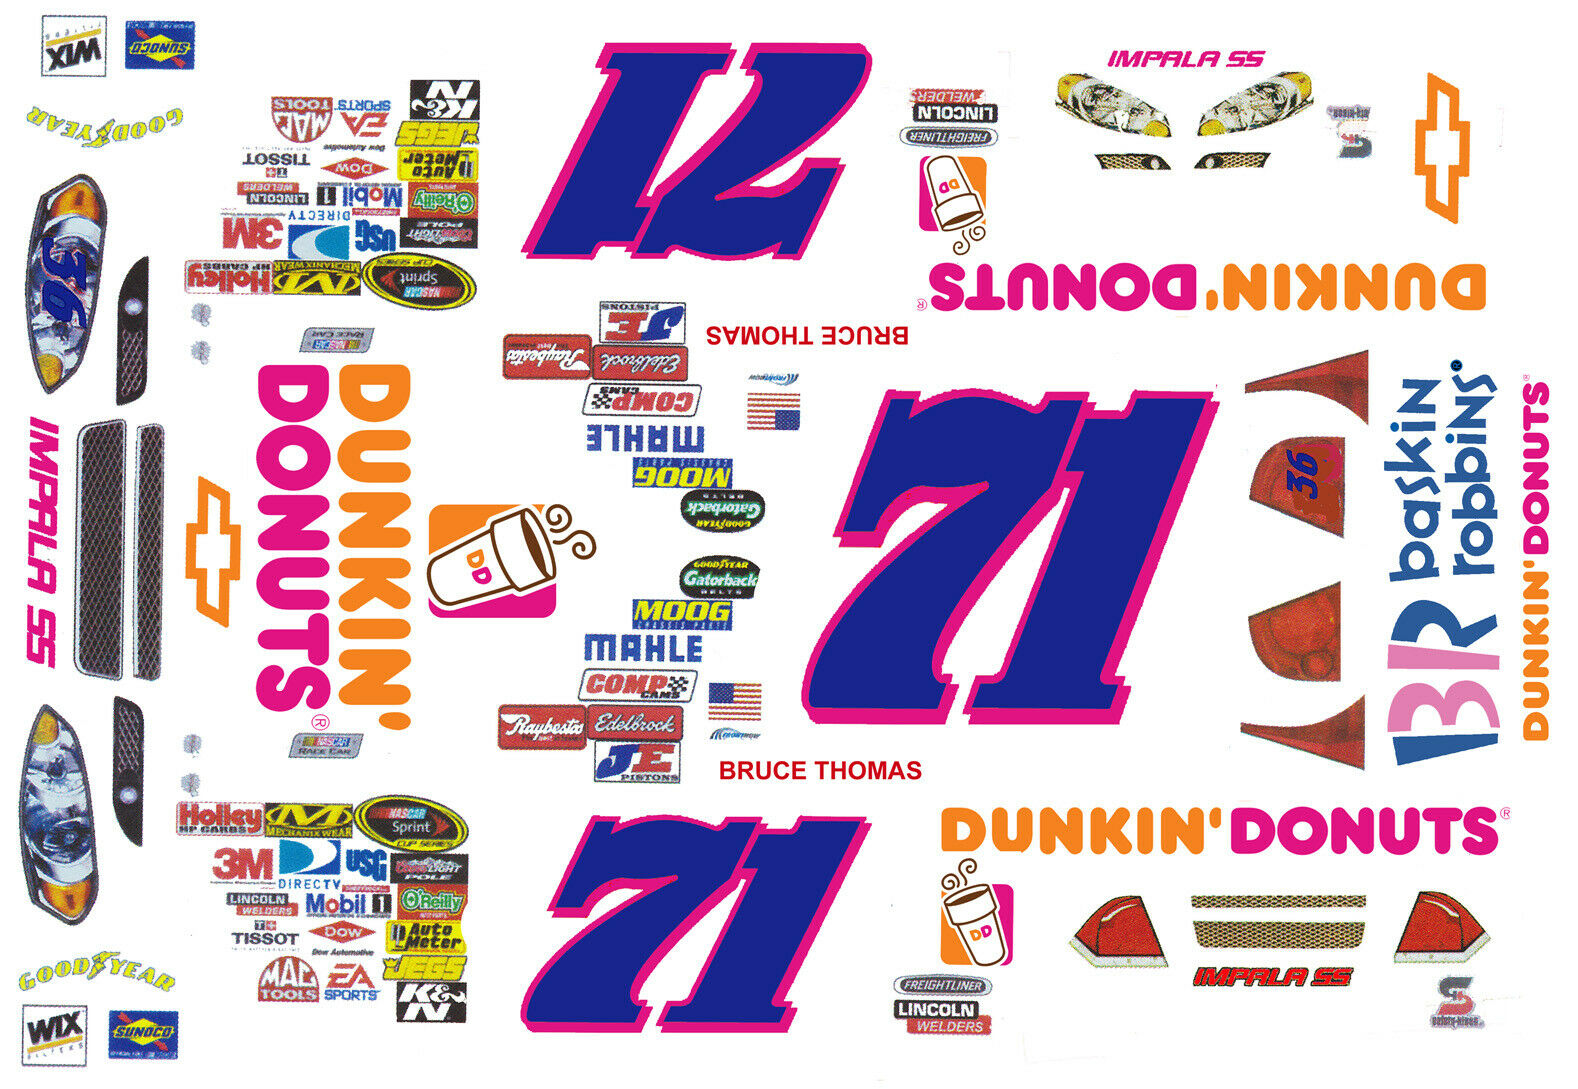 #71 Bruce Thomas Dunkin Donuts Chevy 1/32nd Scale Slot Car Decals